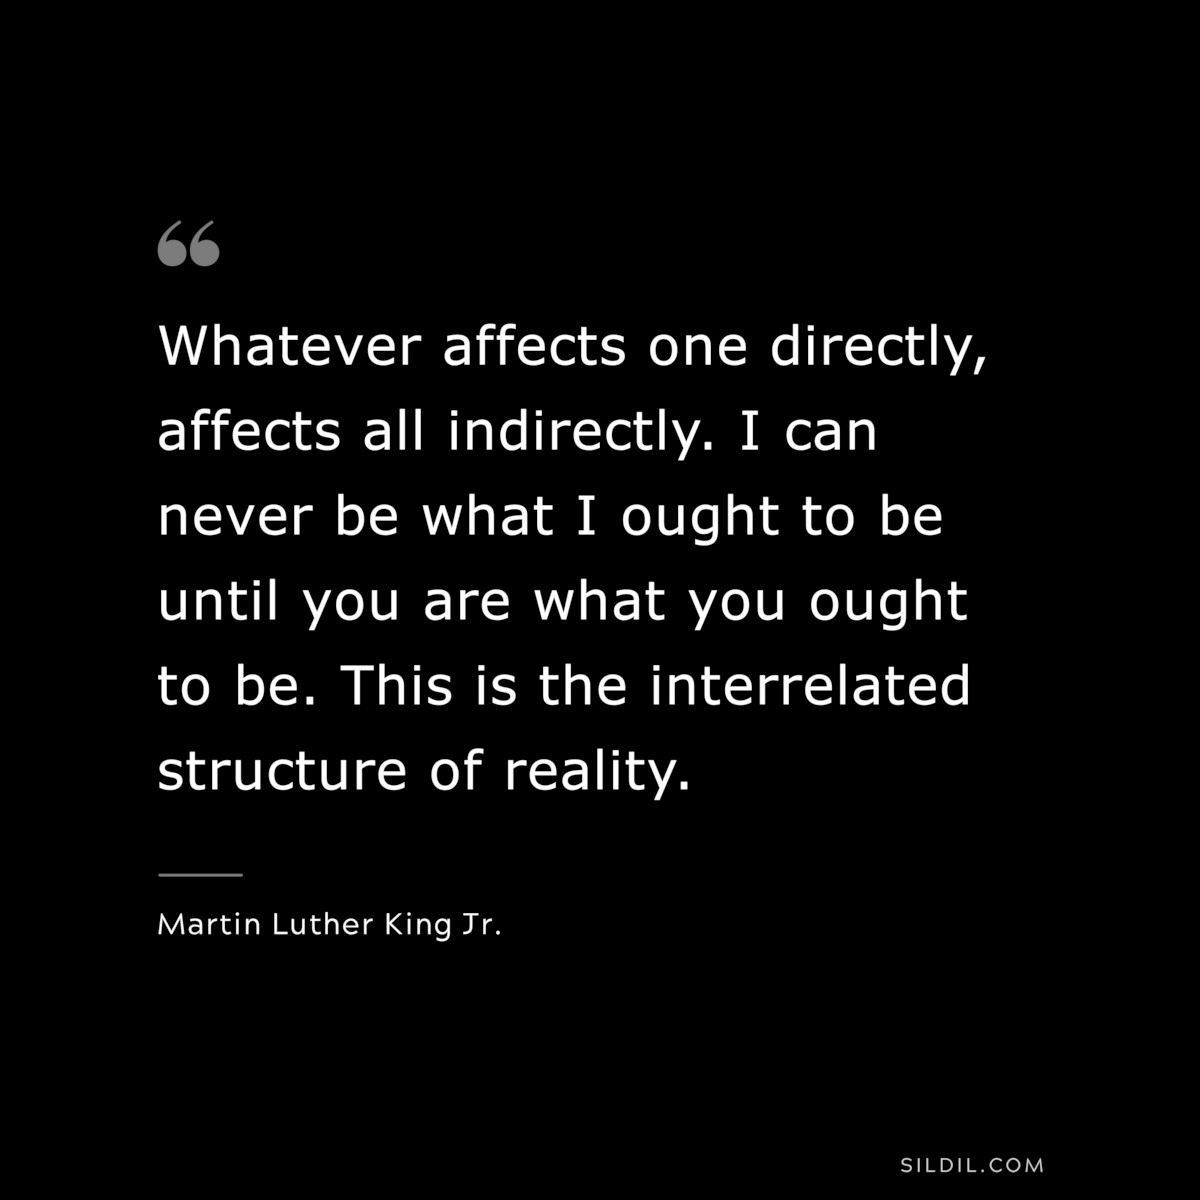 Whatever affects one directly, affects all indirectly. I can never be what I ought to be until you are what you ought to be. This is the interrelated structure of reality. ― Martin Luther King Jr.